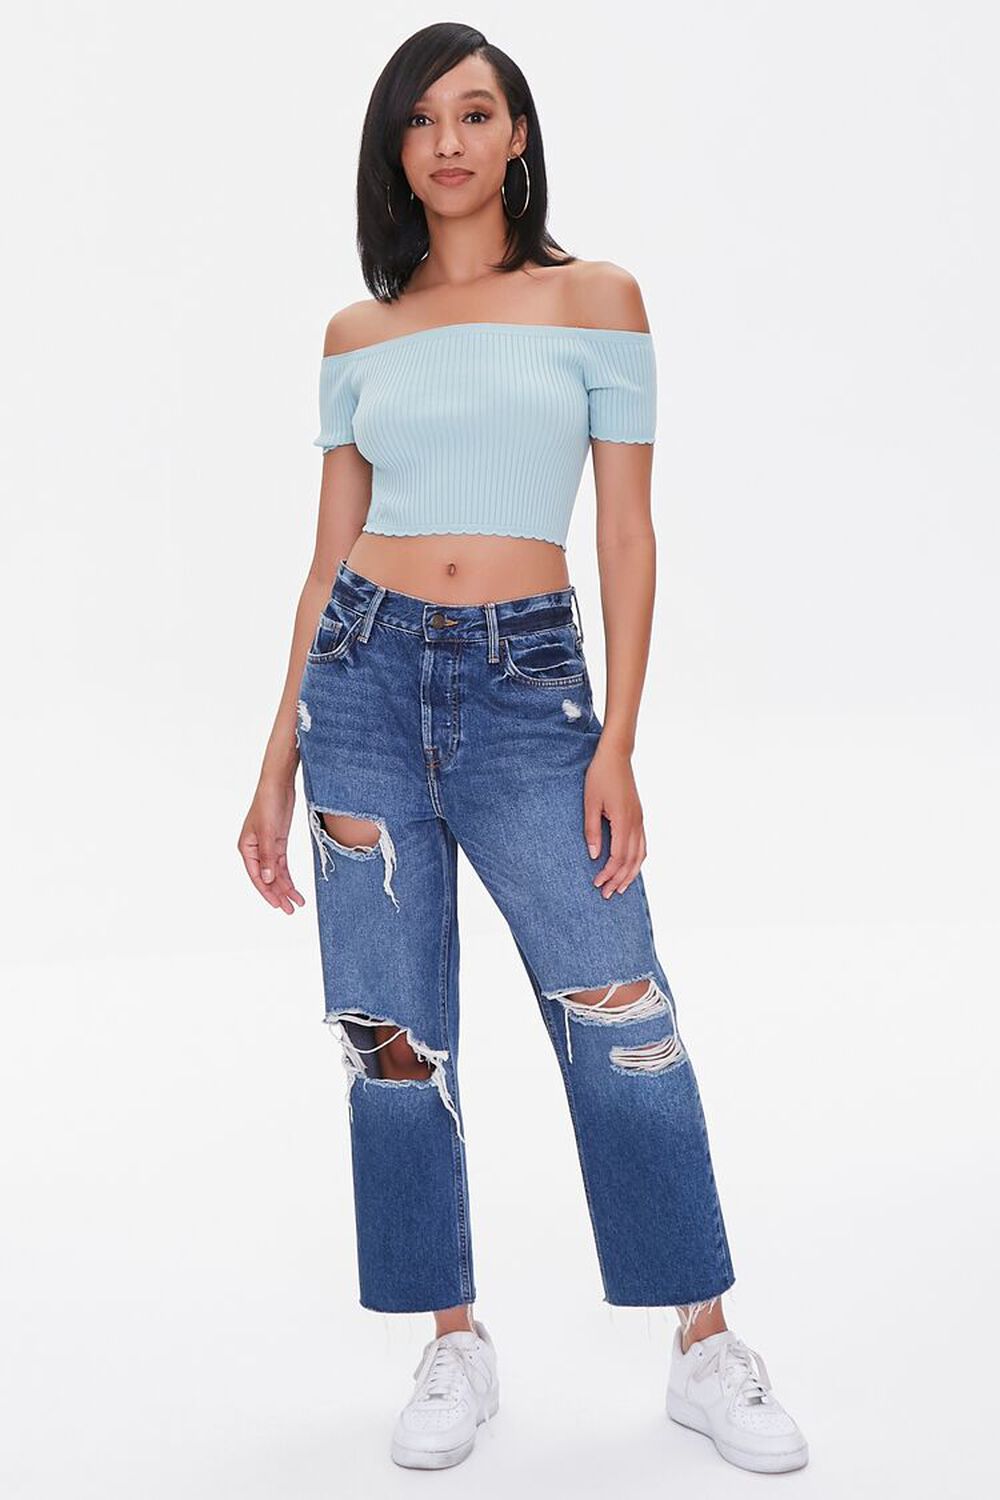 Sweater-Knit Off-the-Shoulder Crop Top